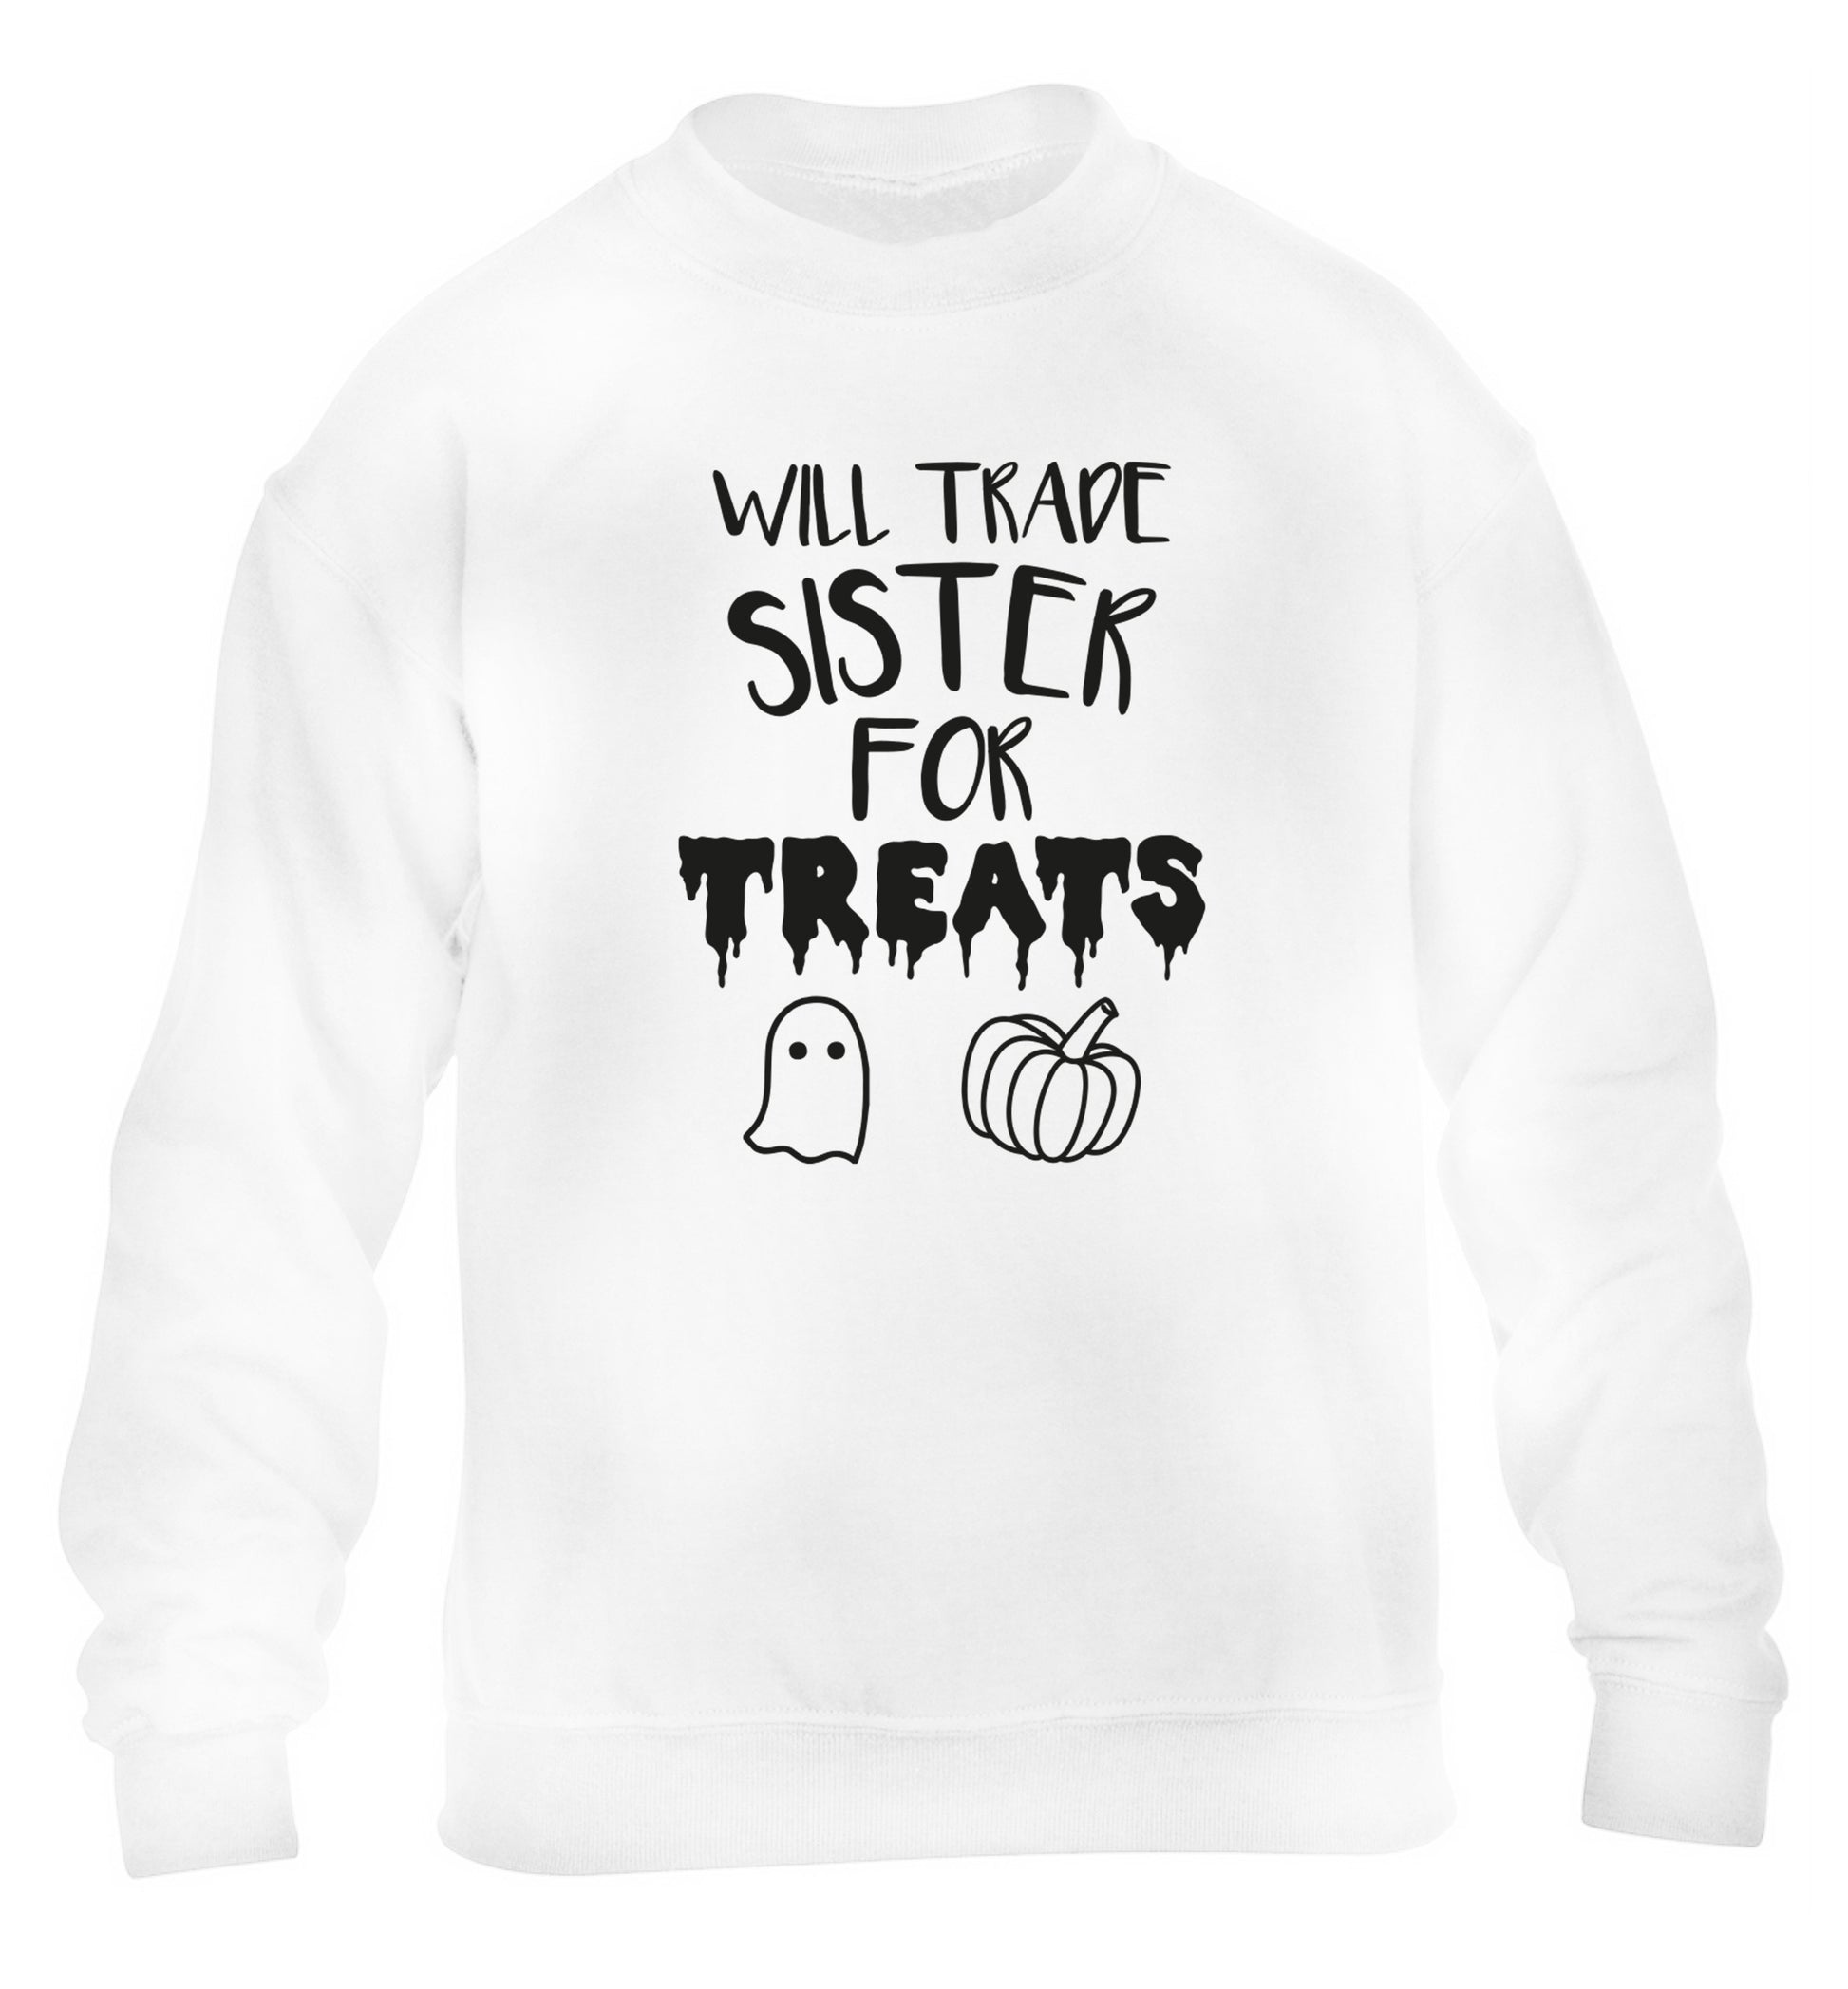 Will trade sister for treats children's white sweater 12-14 Years